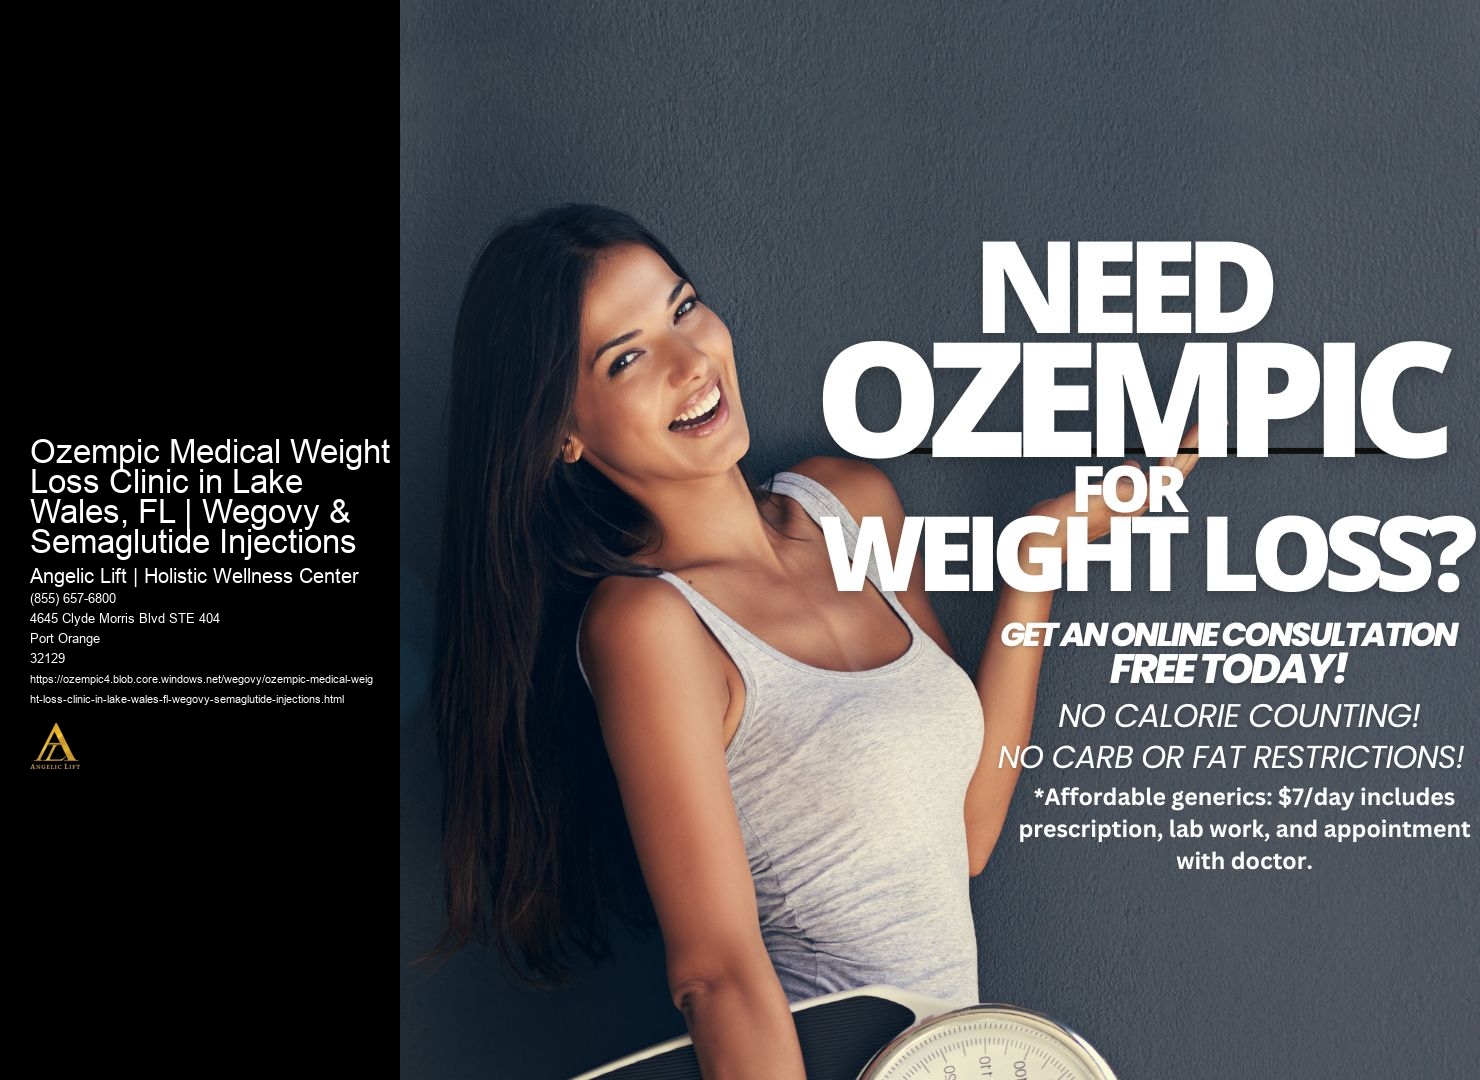 Ozempic Medical Weight Loss Clinic in Lake Wales, FL | Wegovy & Semaglutide Injections